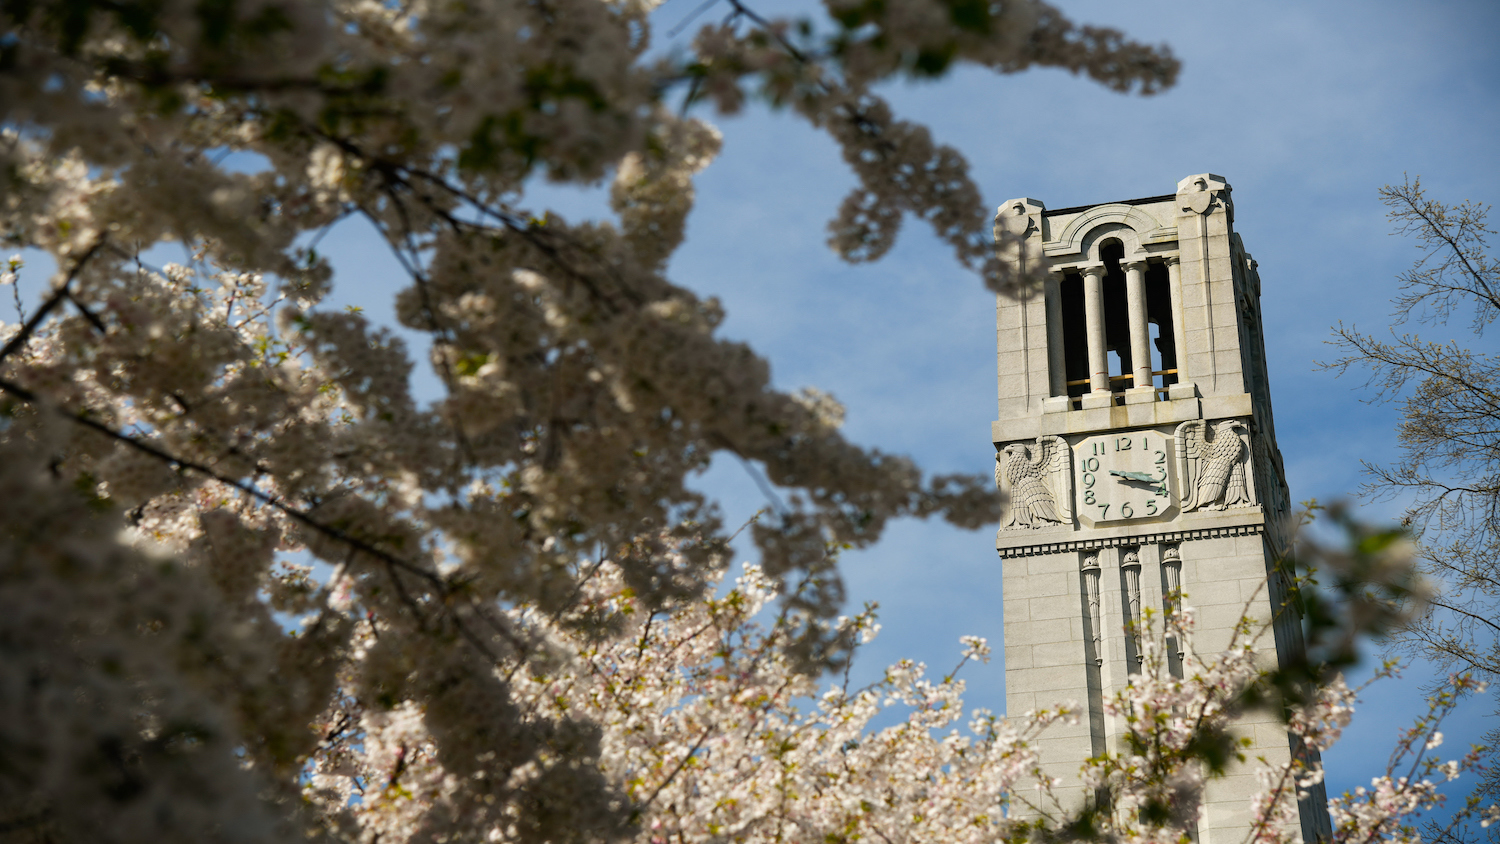 The Belltower framed by blooming trees in Spring.